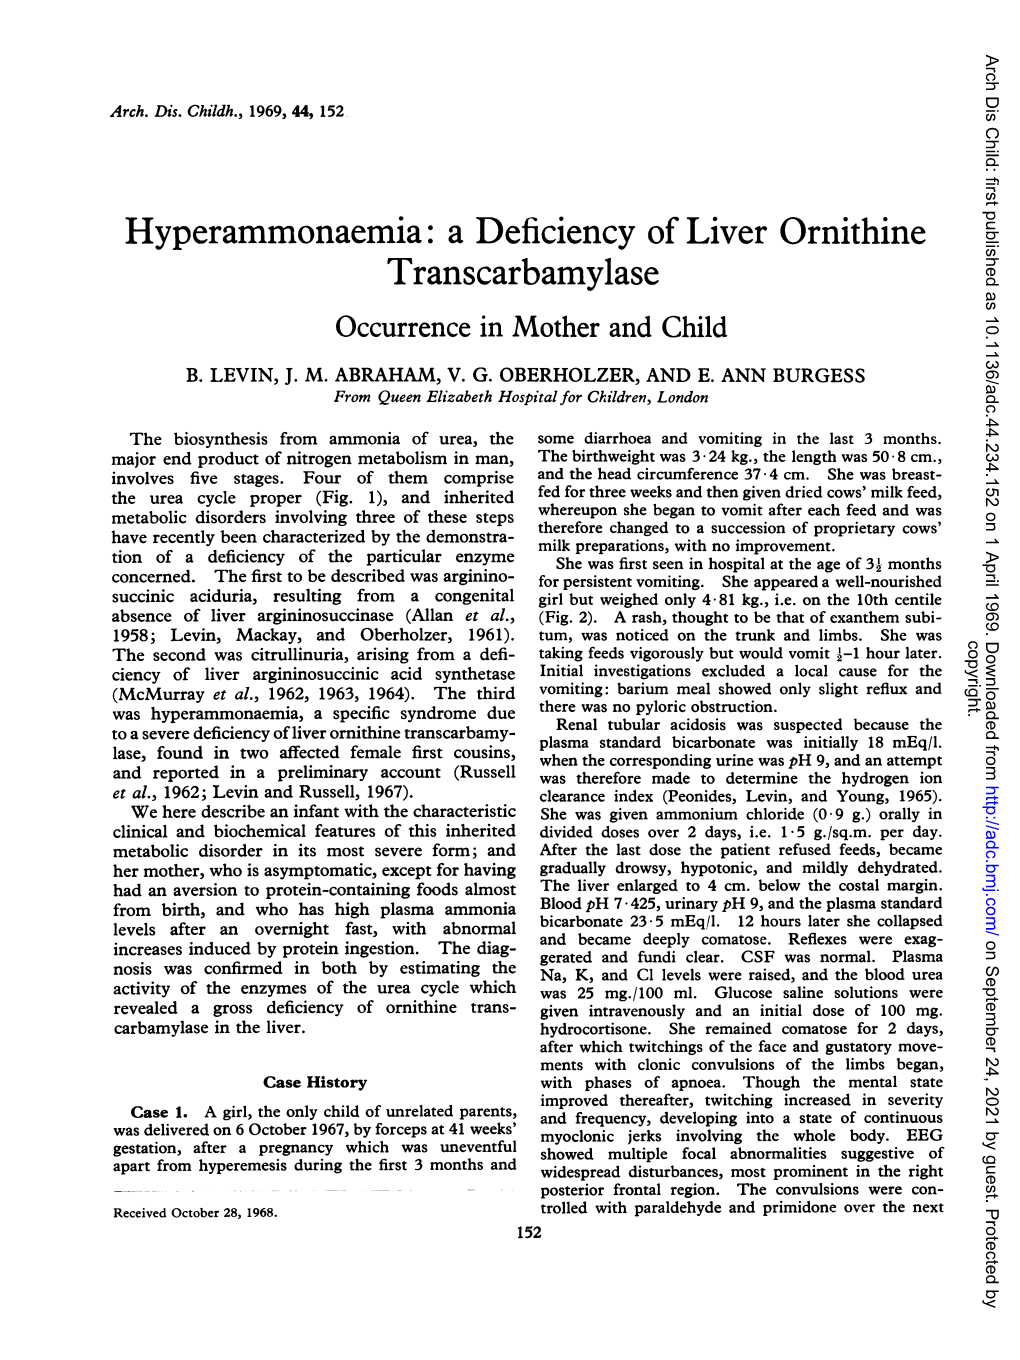 Hyperammonaemia: a Deficiency of Liver Ornithine Transcarbamylase Occurrence in Mother and Child B